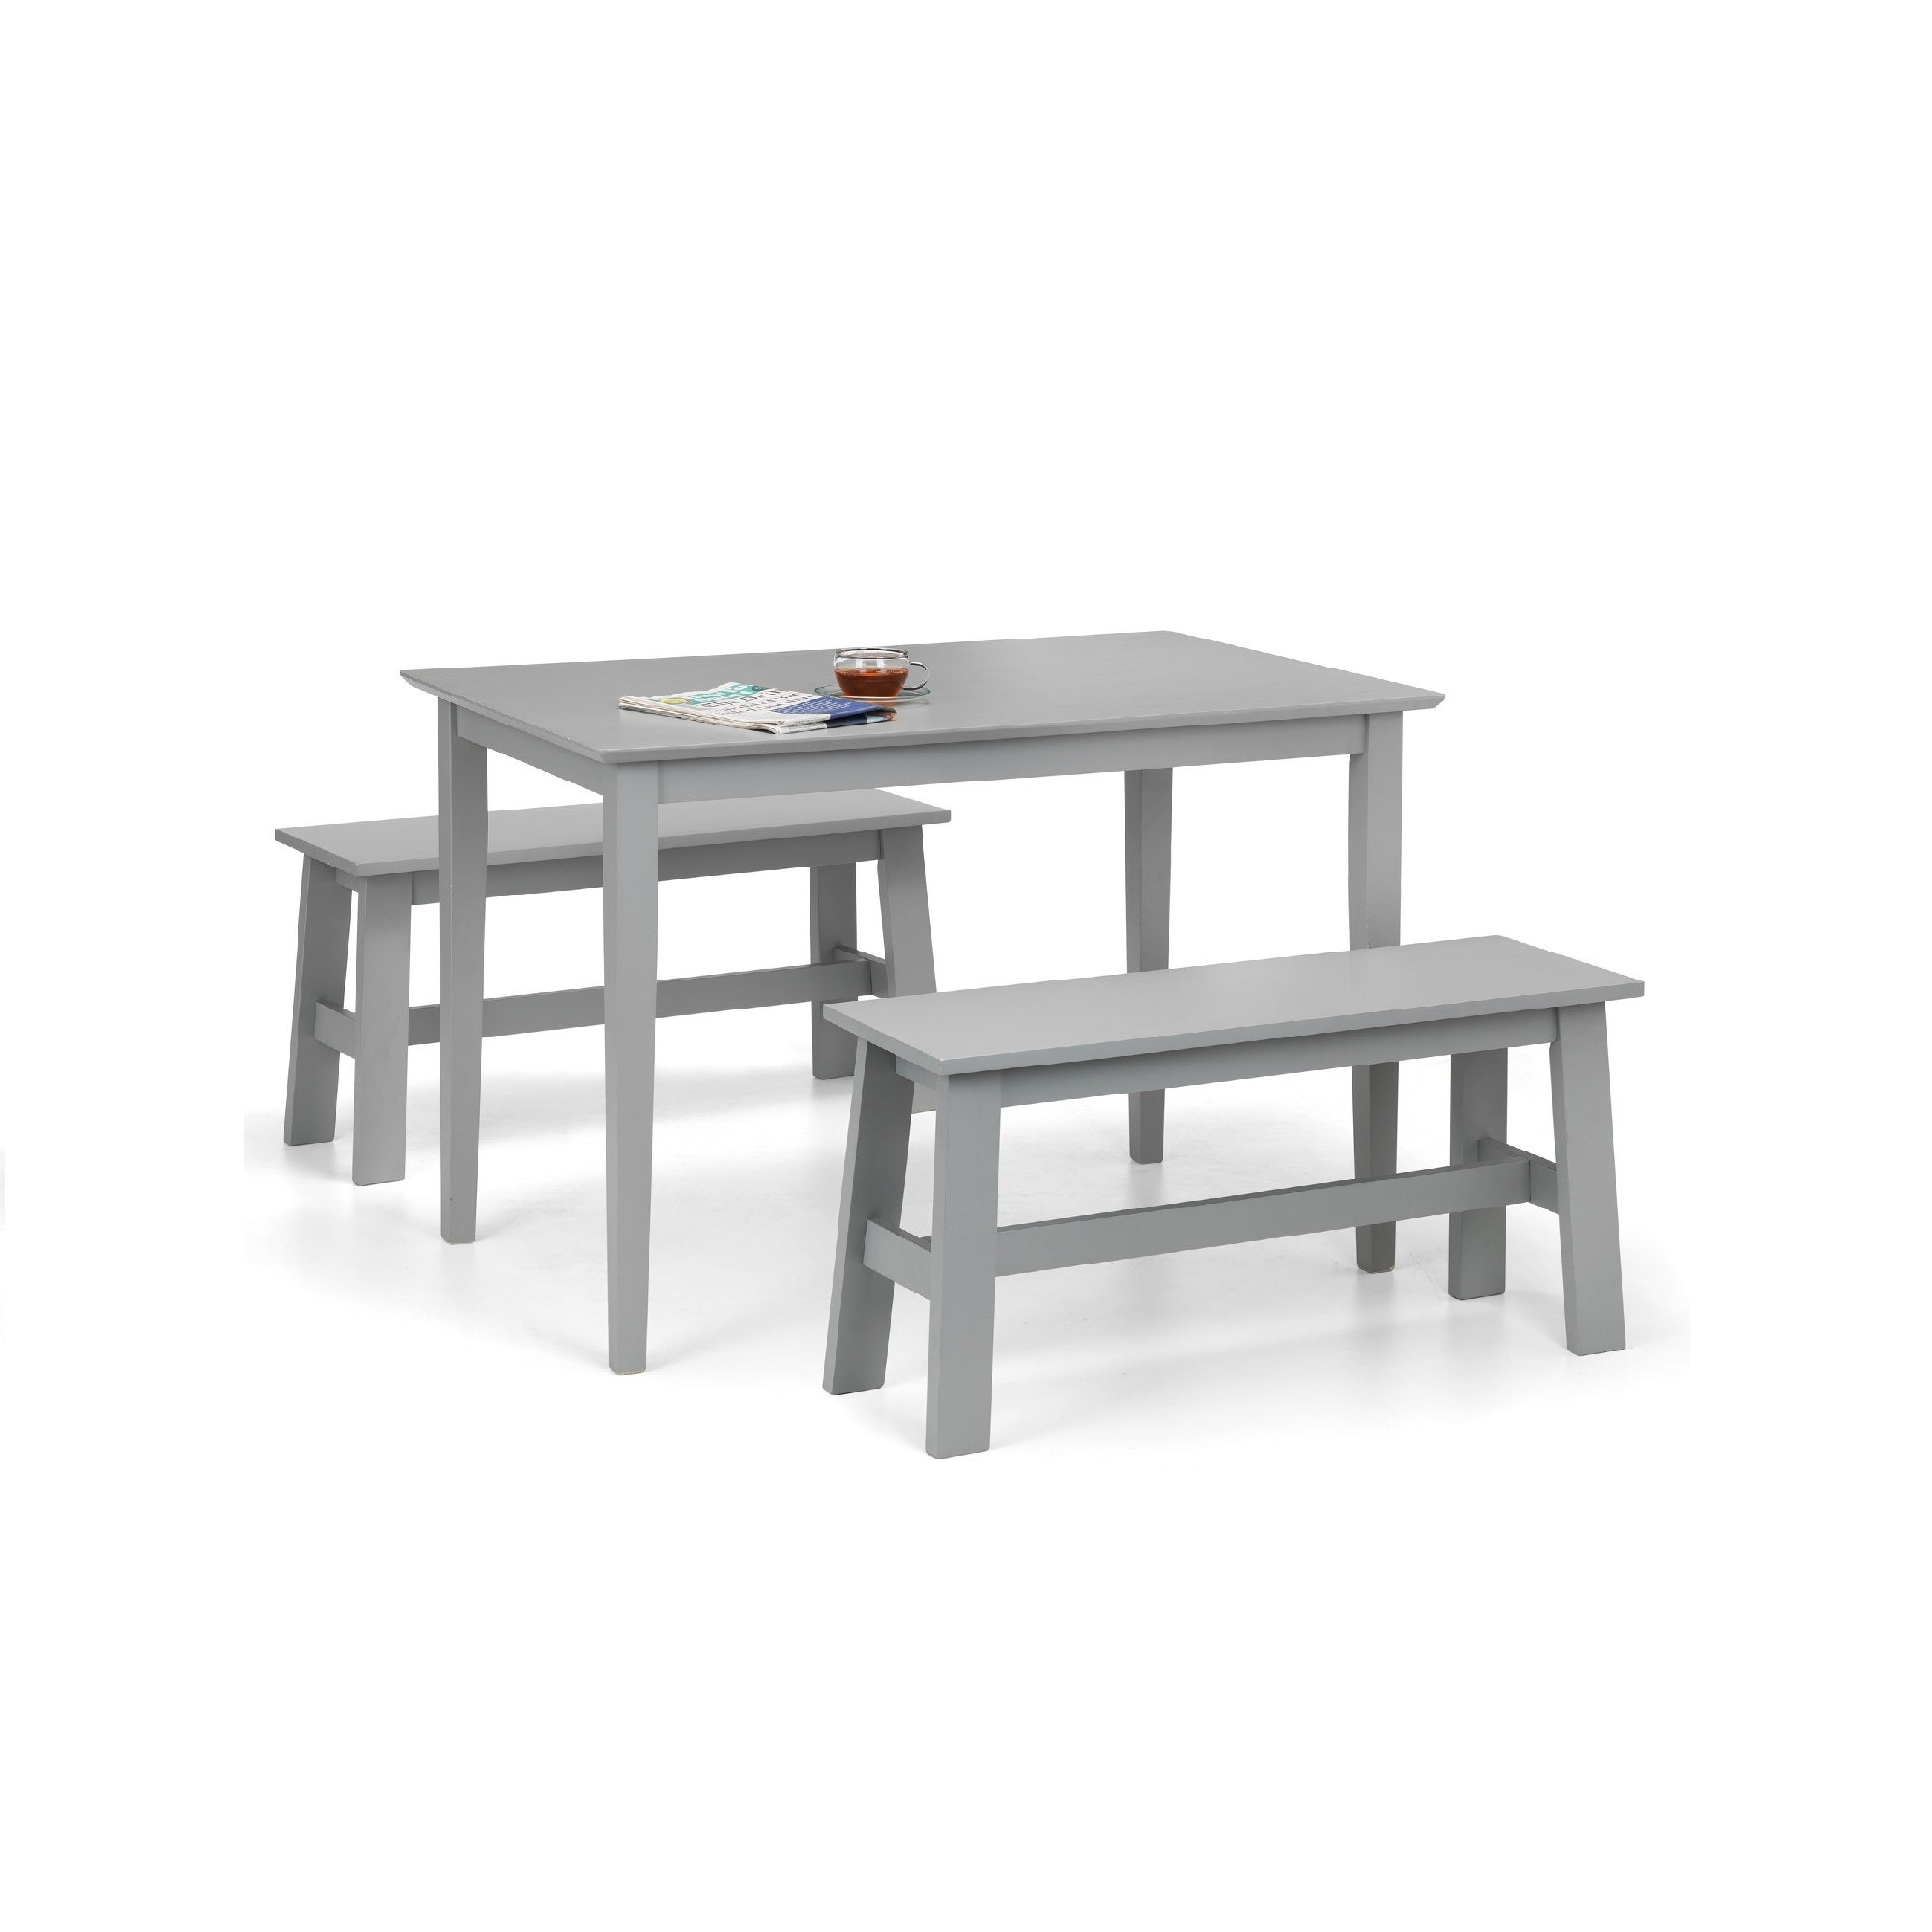 Kobe Rectangular Dining Table with 2 Benches, Grey Grey